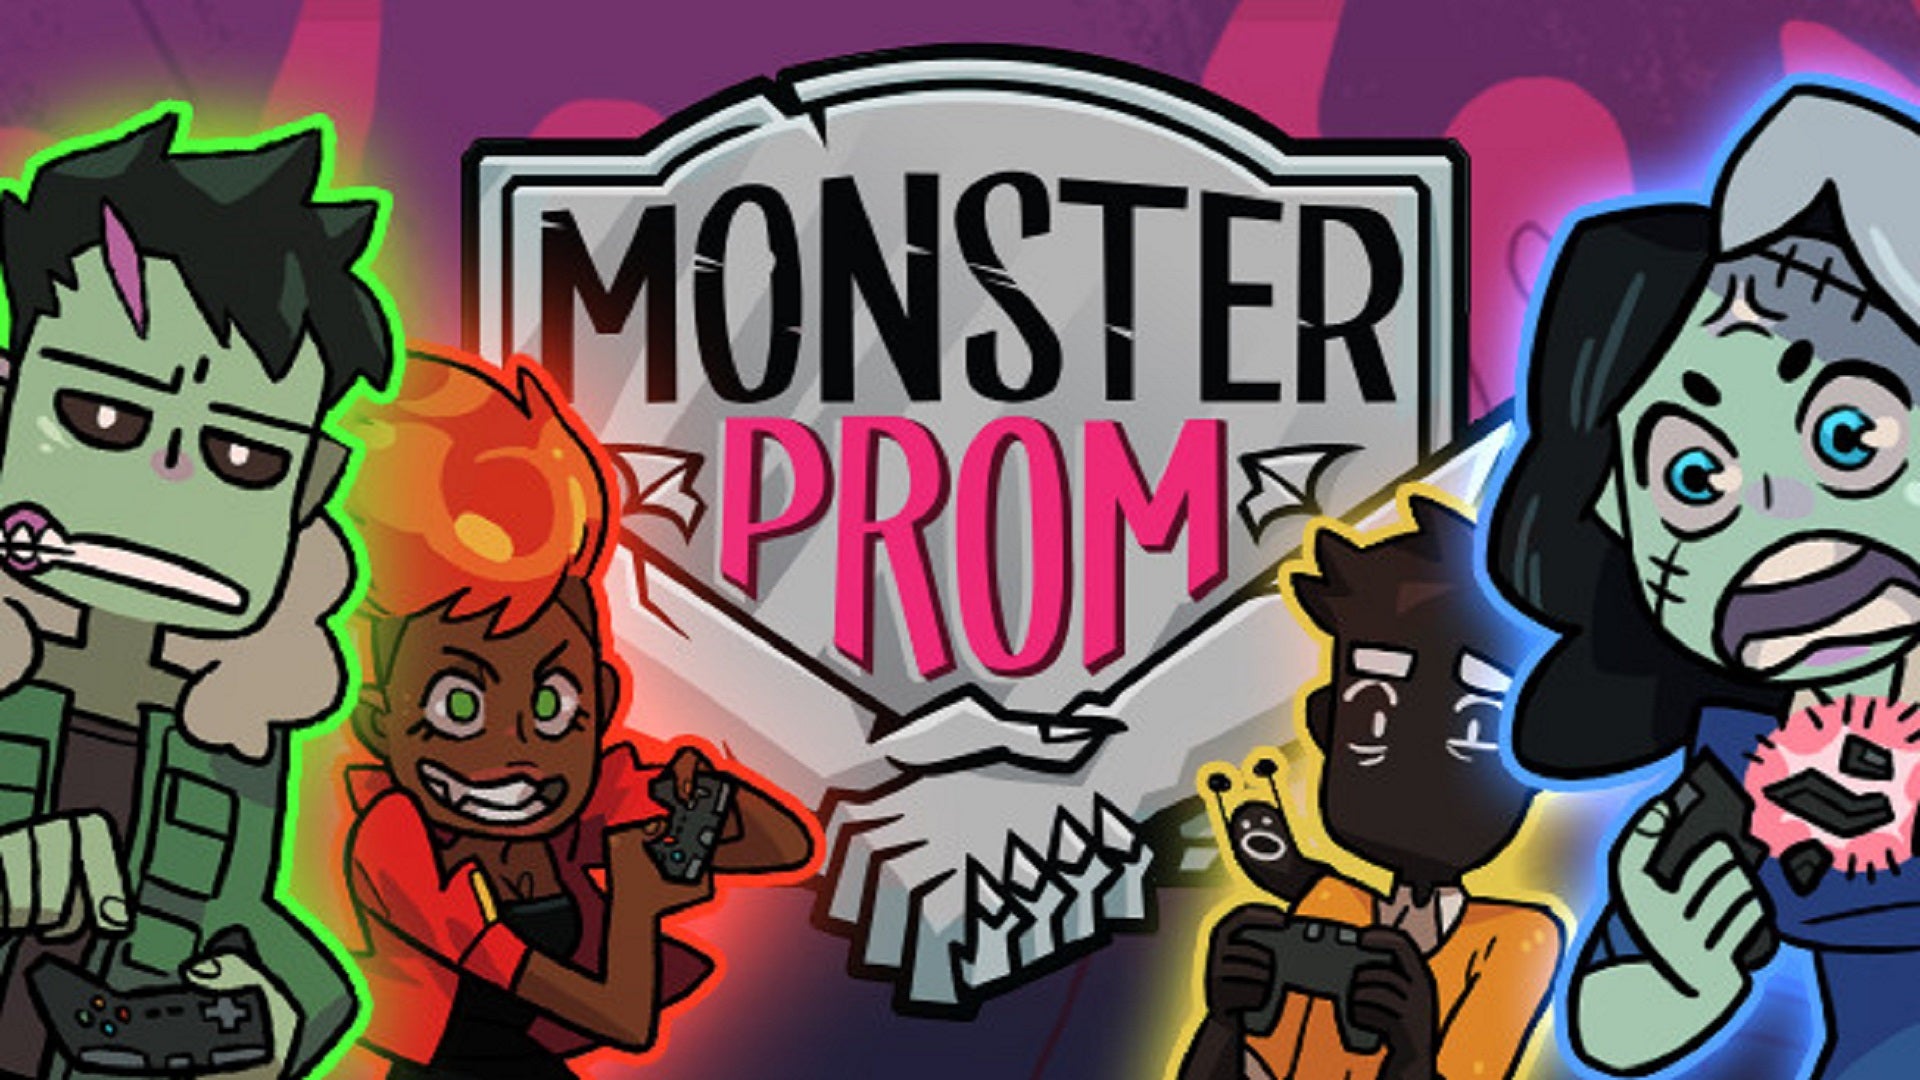 The Monster Prom logo surrounded by the four playable characters: a zombie boy, fire djinn girl, shadow boy, and Frankenstein's monster girl.